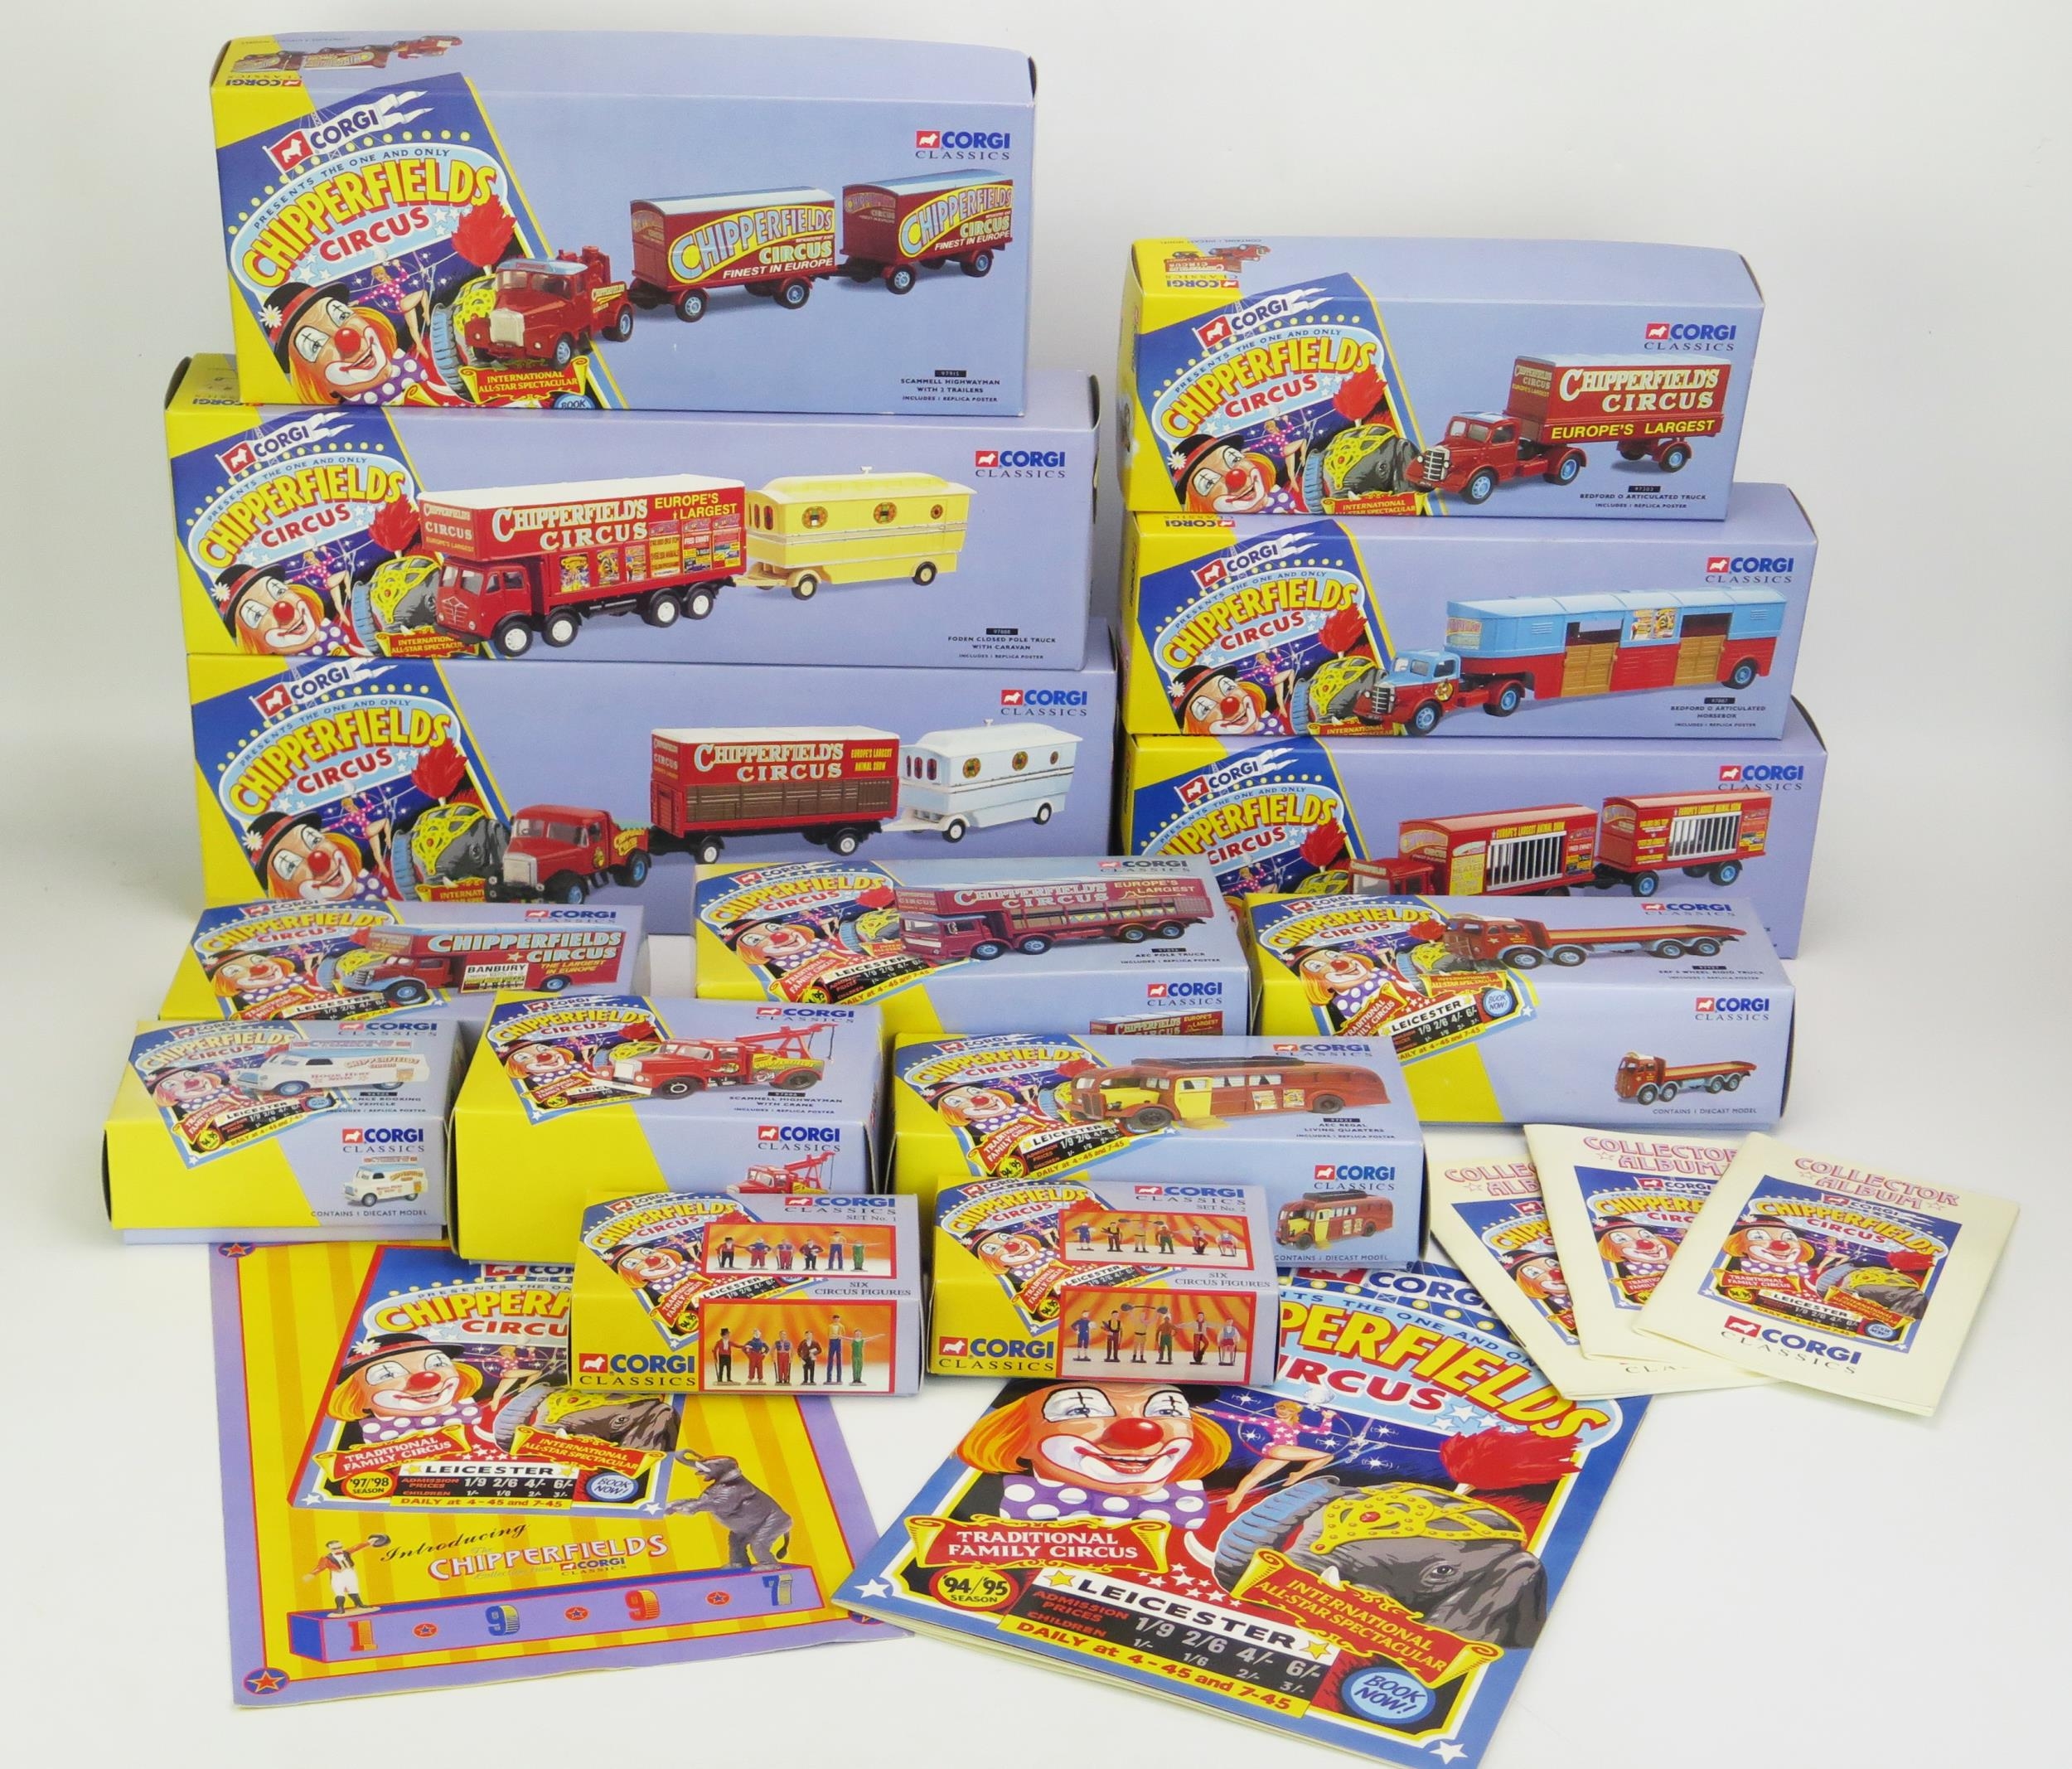 Corgi Classics Chipperfields Circus Collection including 97885